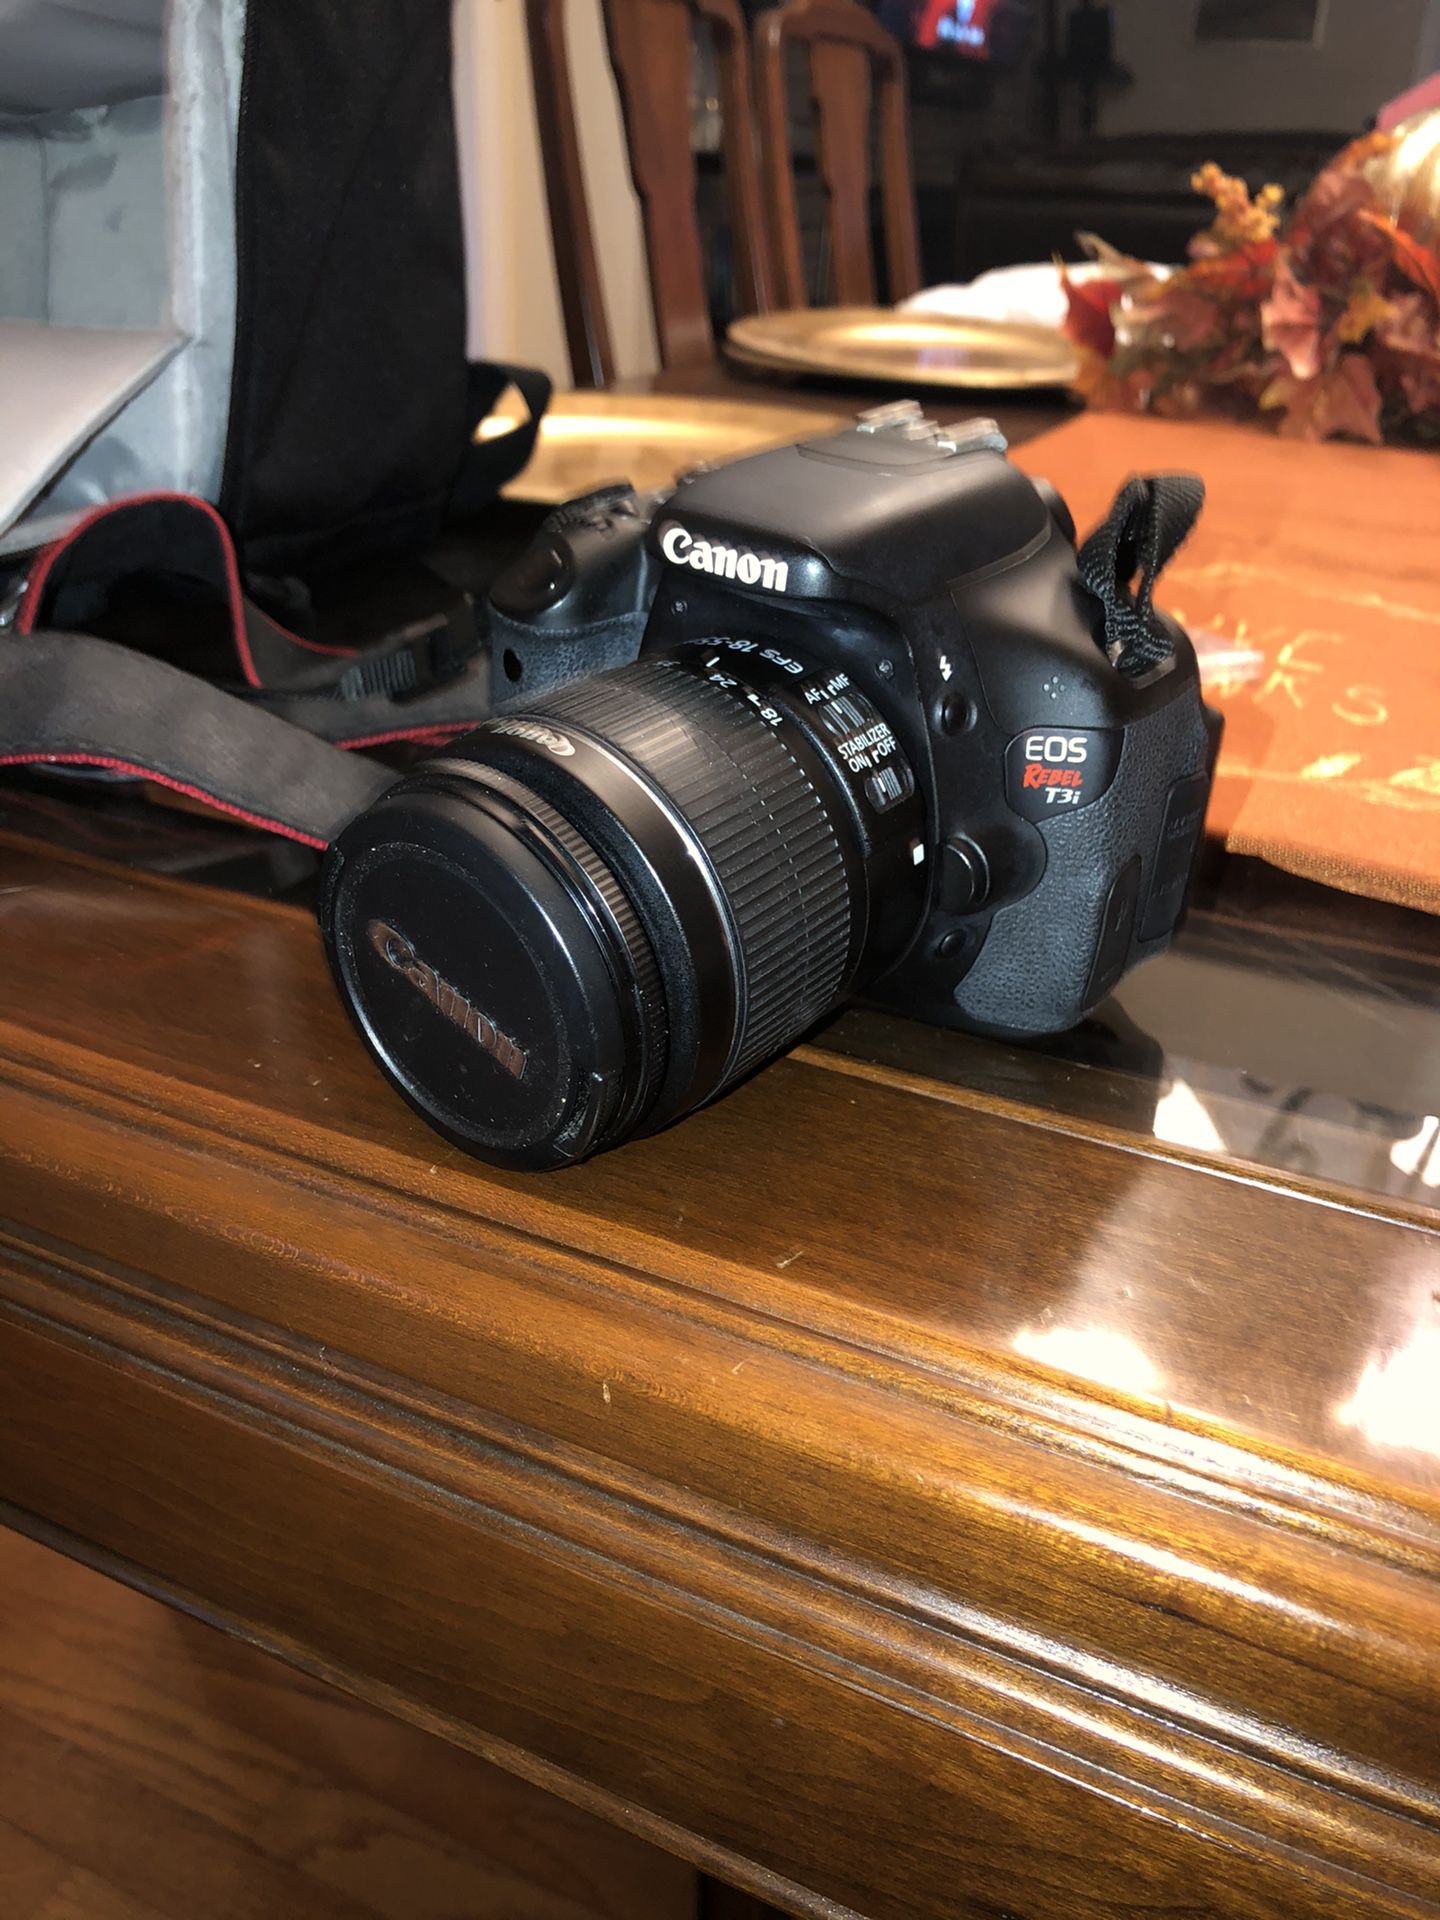 Canon EOS Rebel T3i DSLR camera with backpack